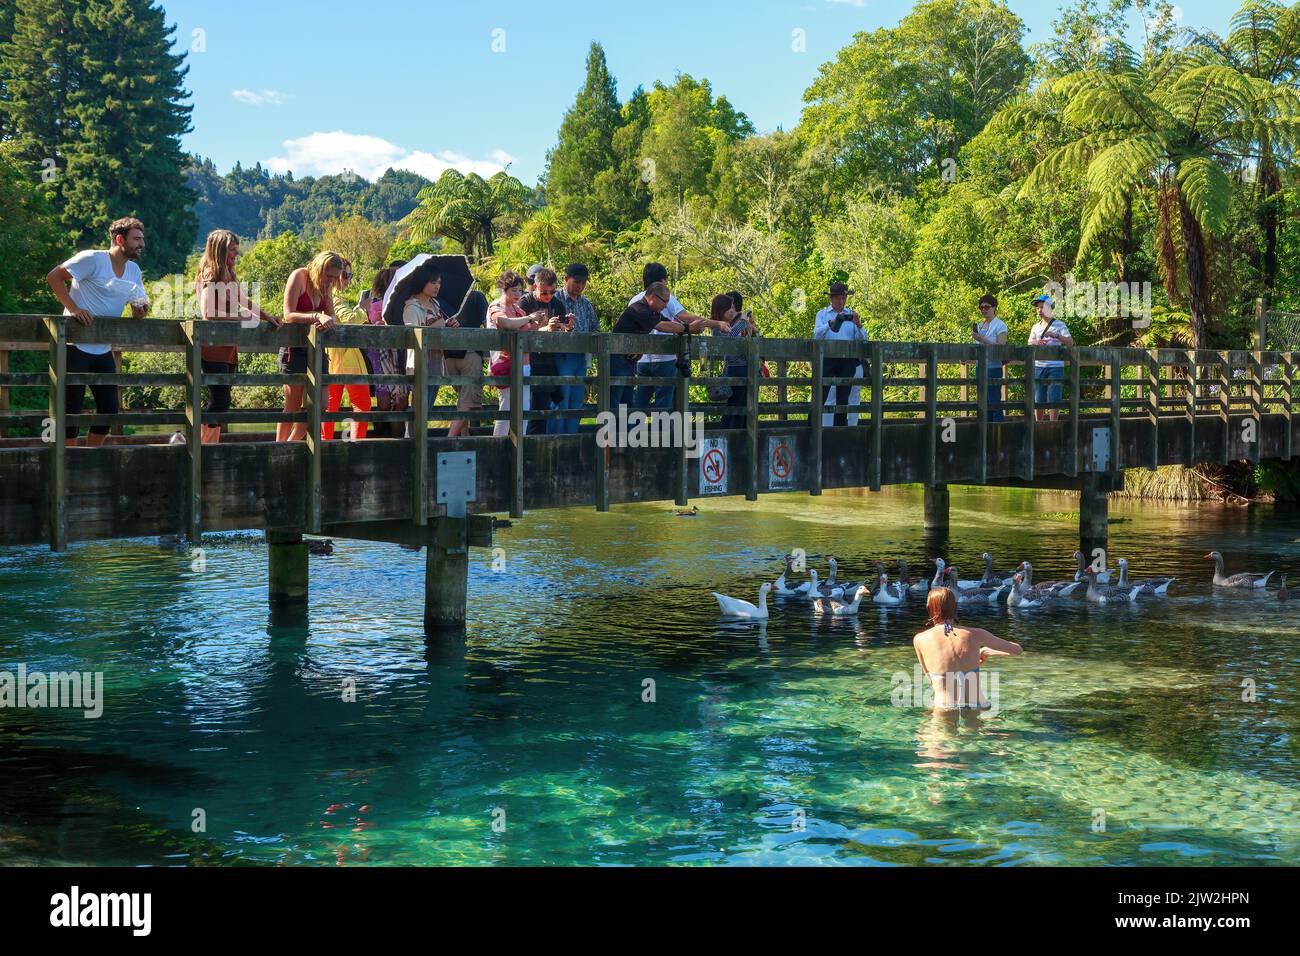 A woman bathes in a river at scenic Hamurana Springs near Rotorua, New Zealand, watched by tourists on a bridge and a flock of geese in the water Stock Photo